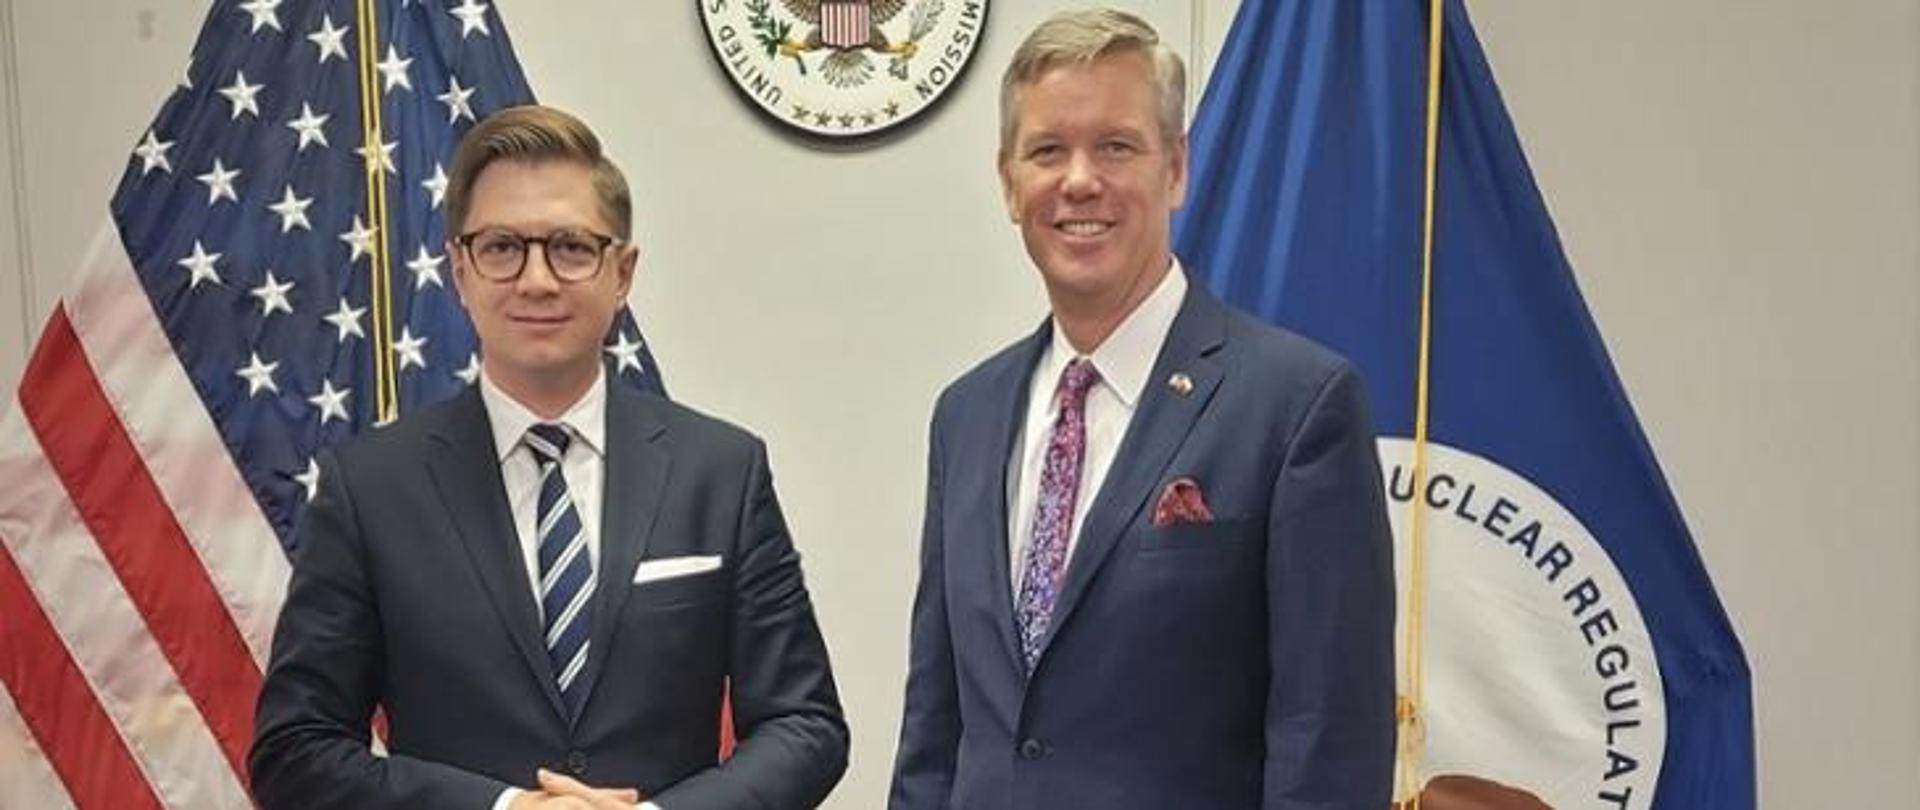 Meeting of the PAA President Dr. Łukasz Młynarkiewicz with the chairman of the NRC Christopher Hanson at the seat of the US Nuclear Regulatory Commission.